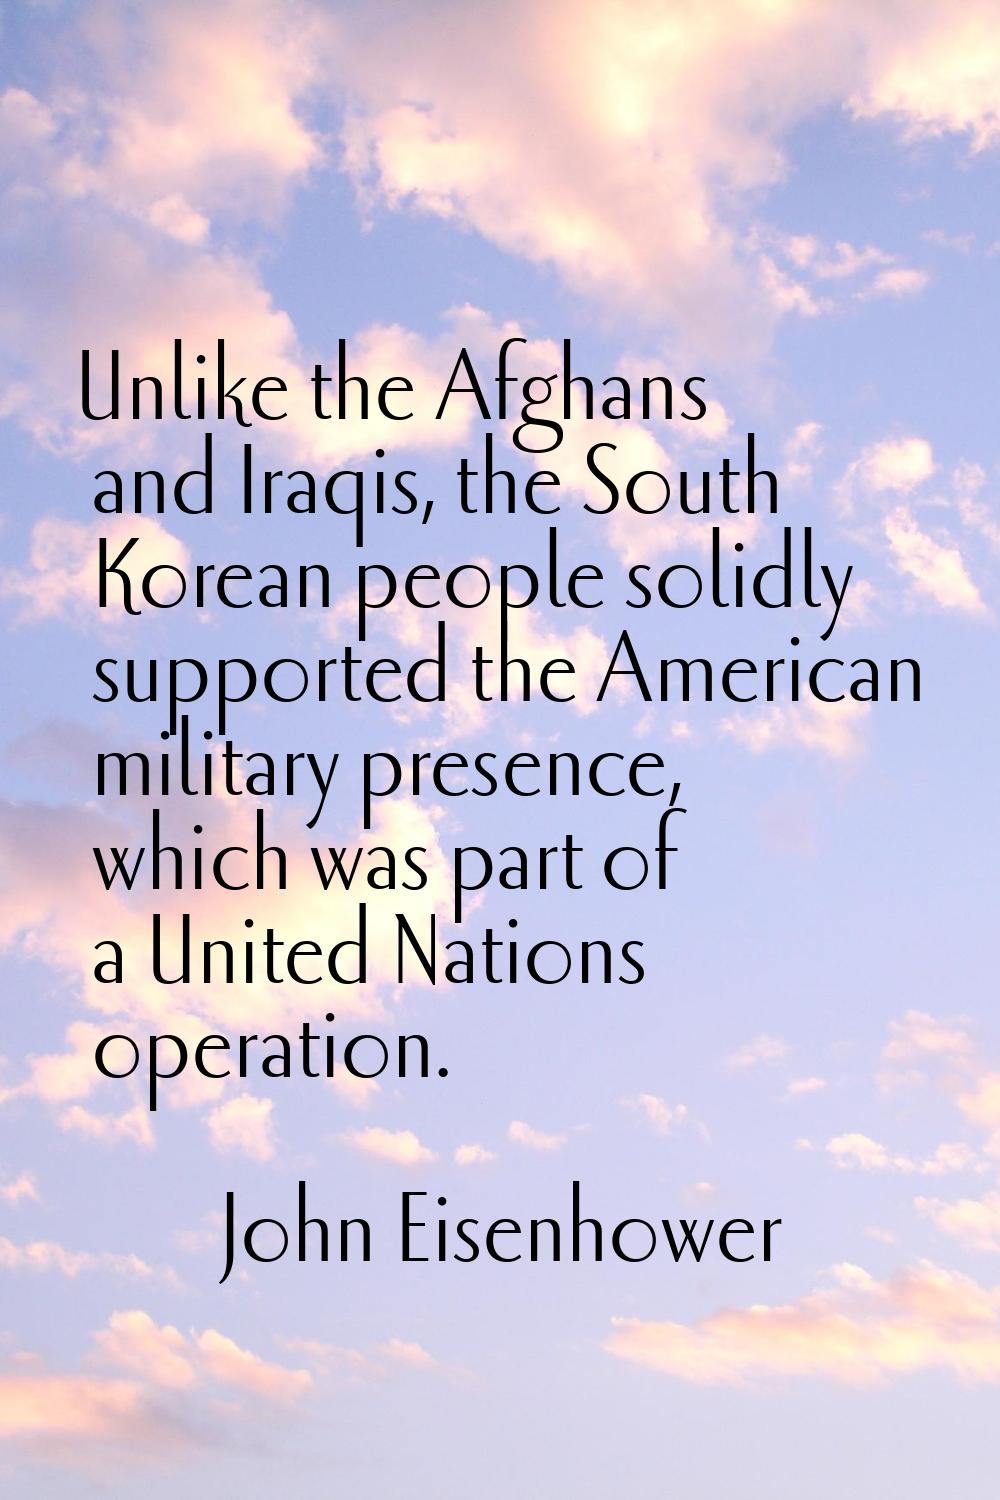 Unlike the Afghans and Iraqis, the South Korean people solidly supported the American military pres